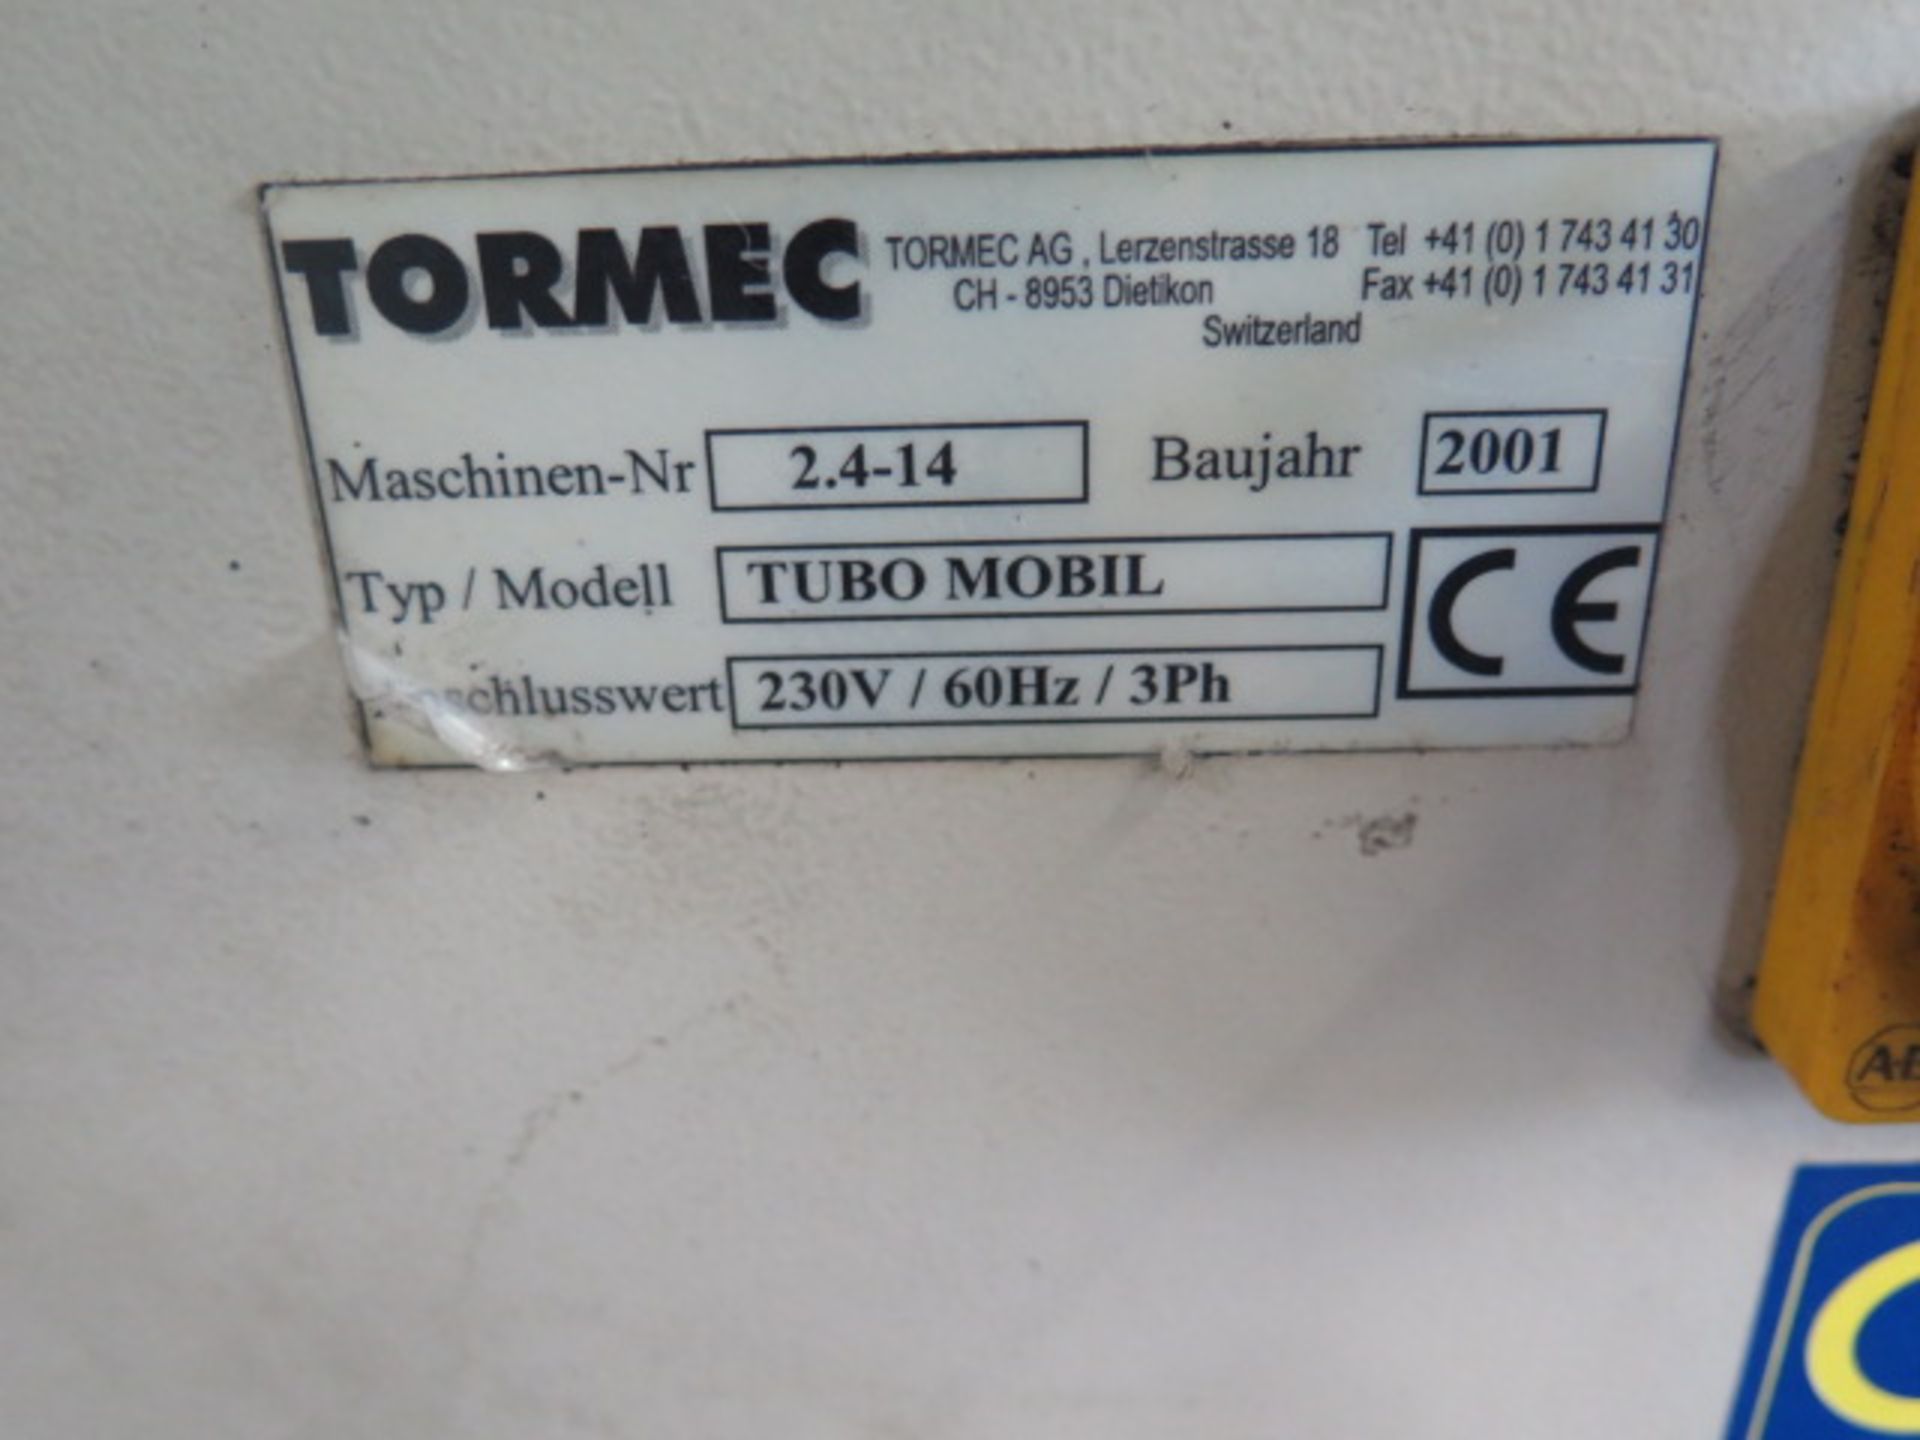 Tormec TUBO MOBIL 4”-54” Spiral Lockseam Duct Tube Forming Machine w/ 4” to 54” Duct Cap, SOLD AS IS - Image 23 of 23